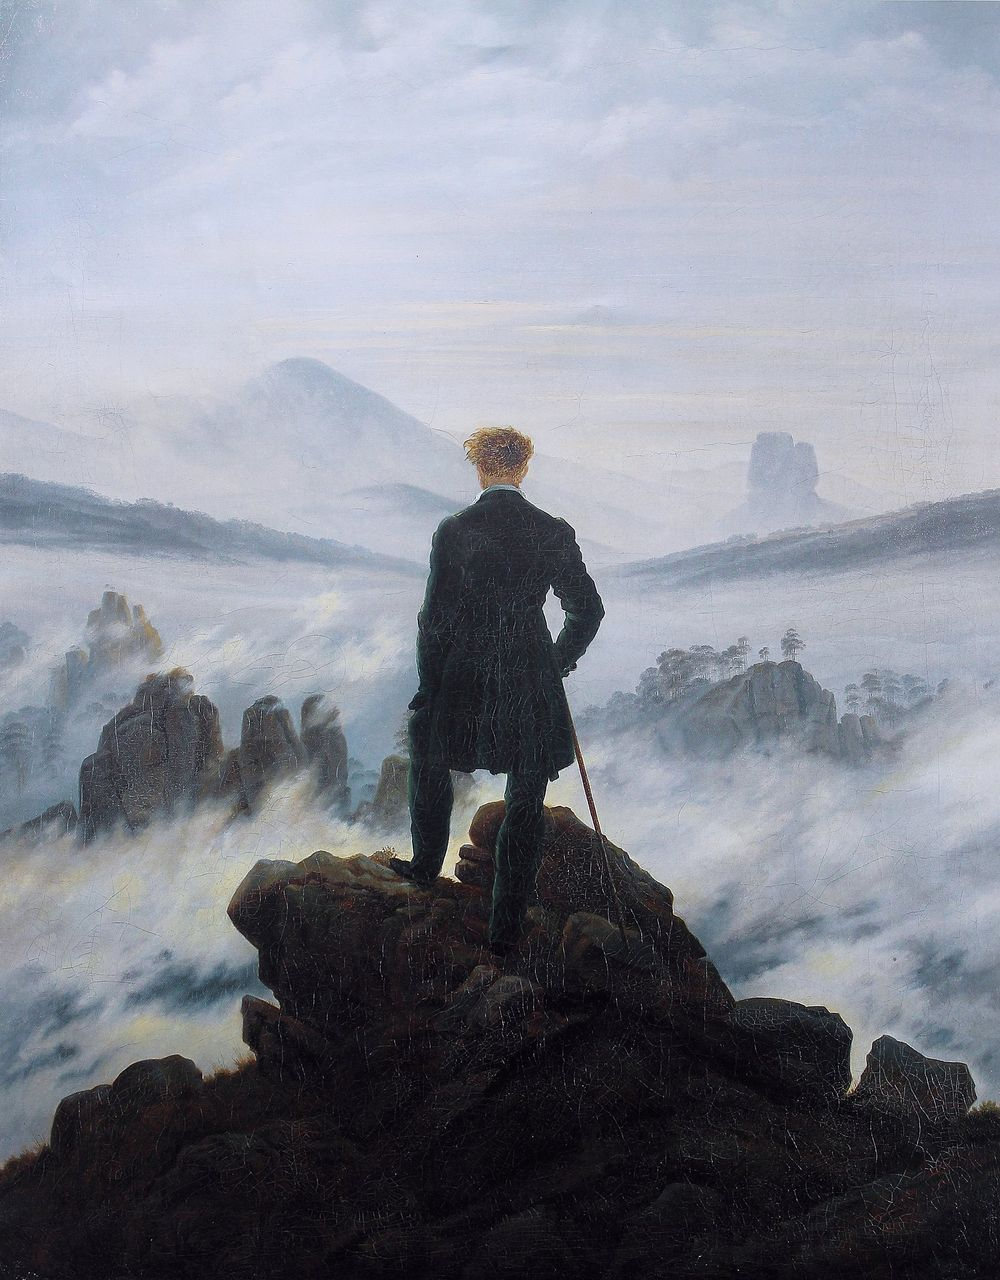 Painting of a man overlooking a misty landscape